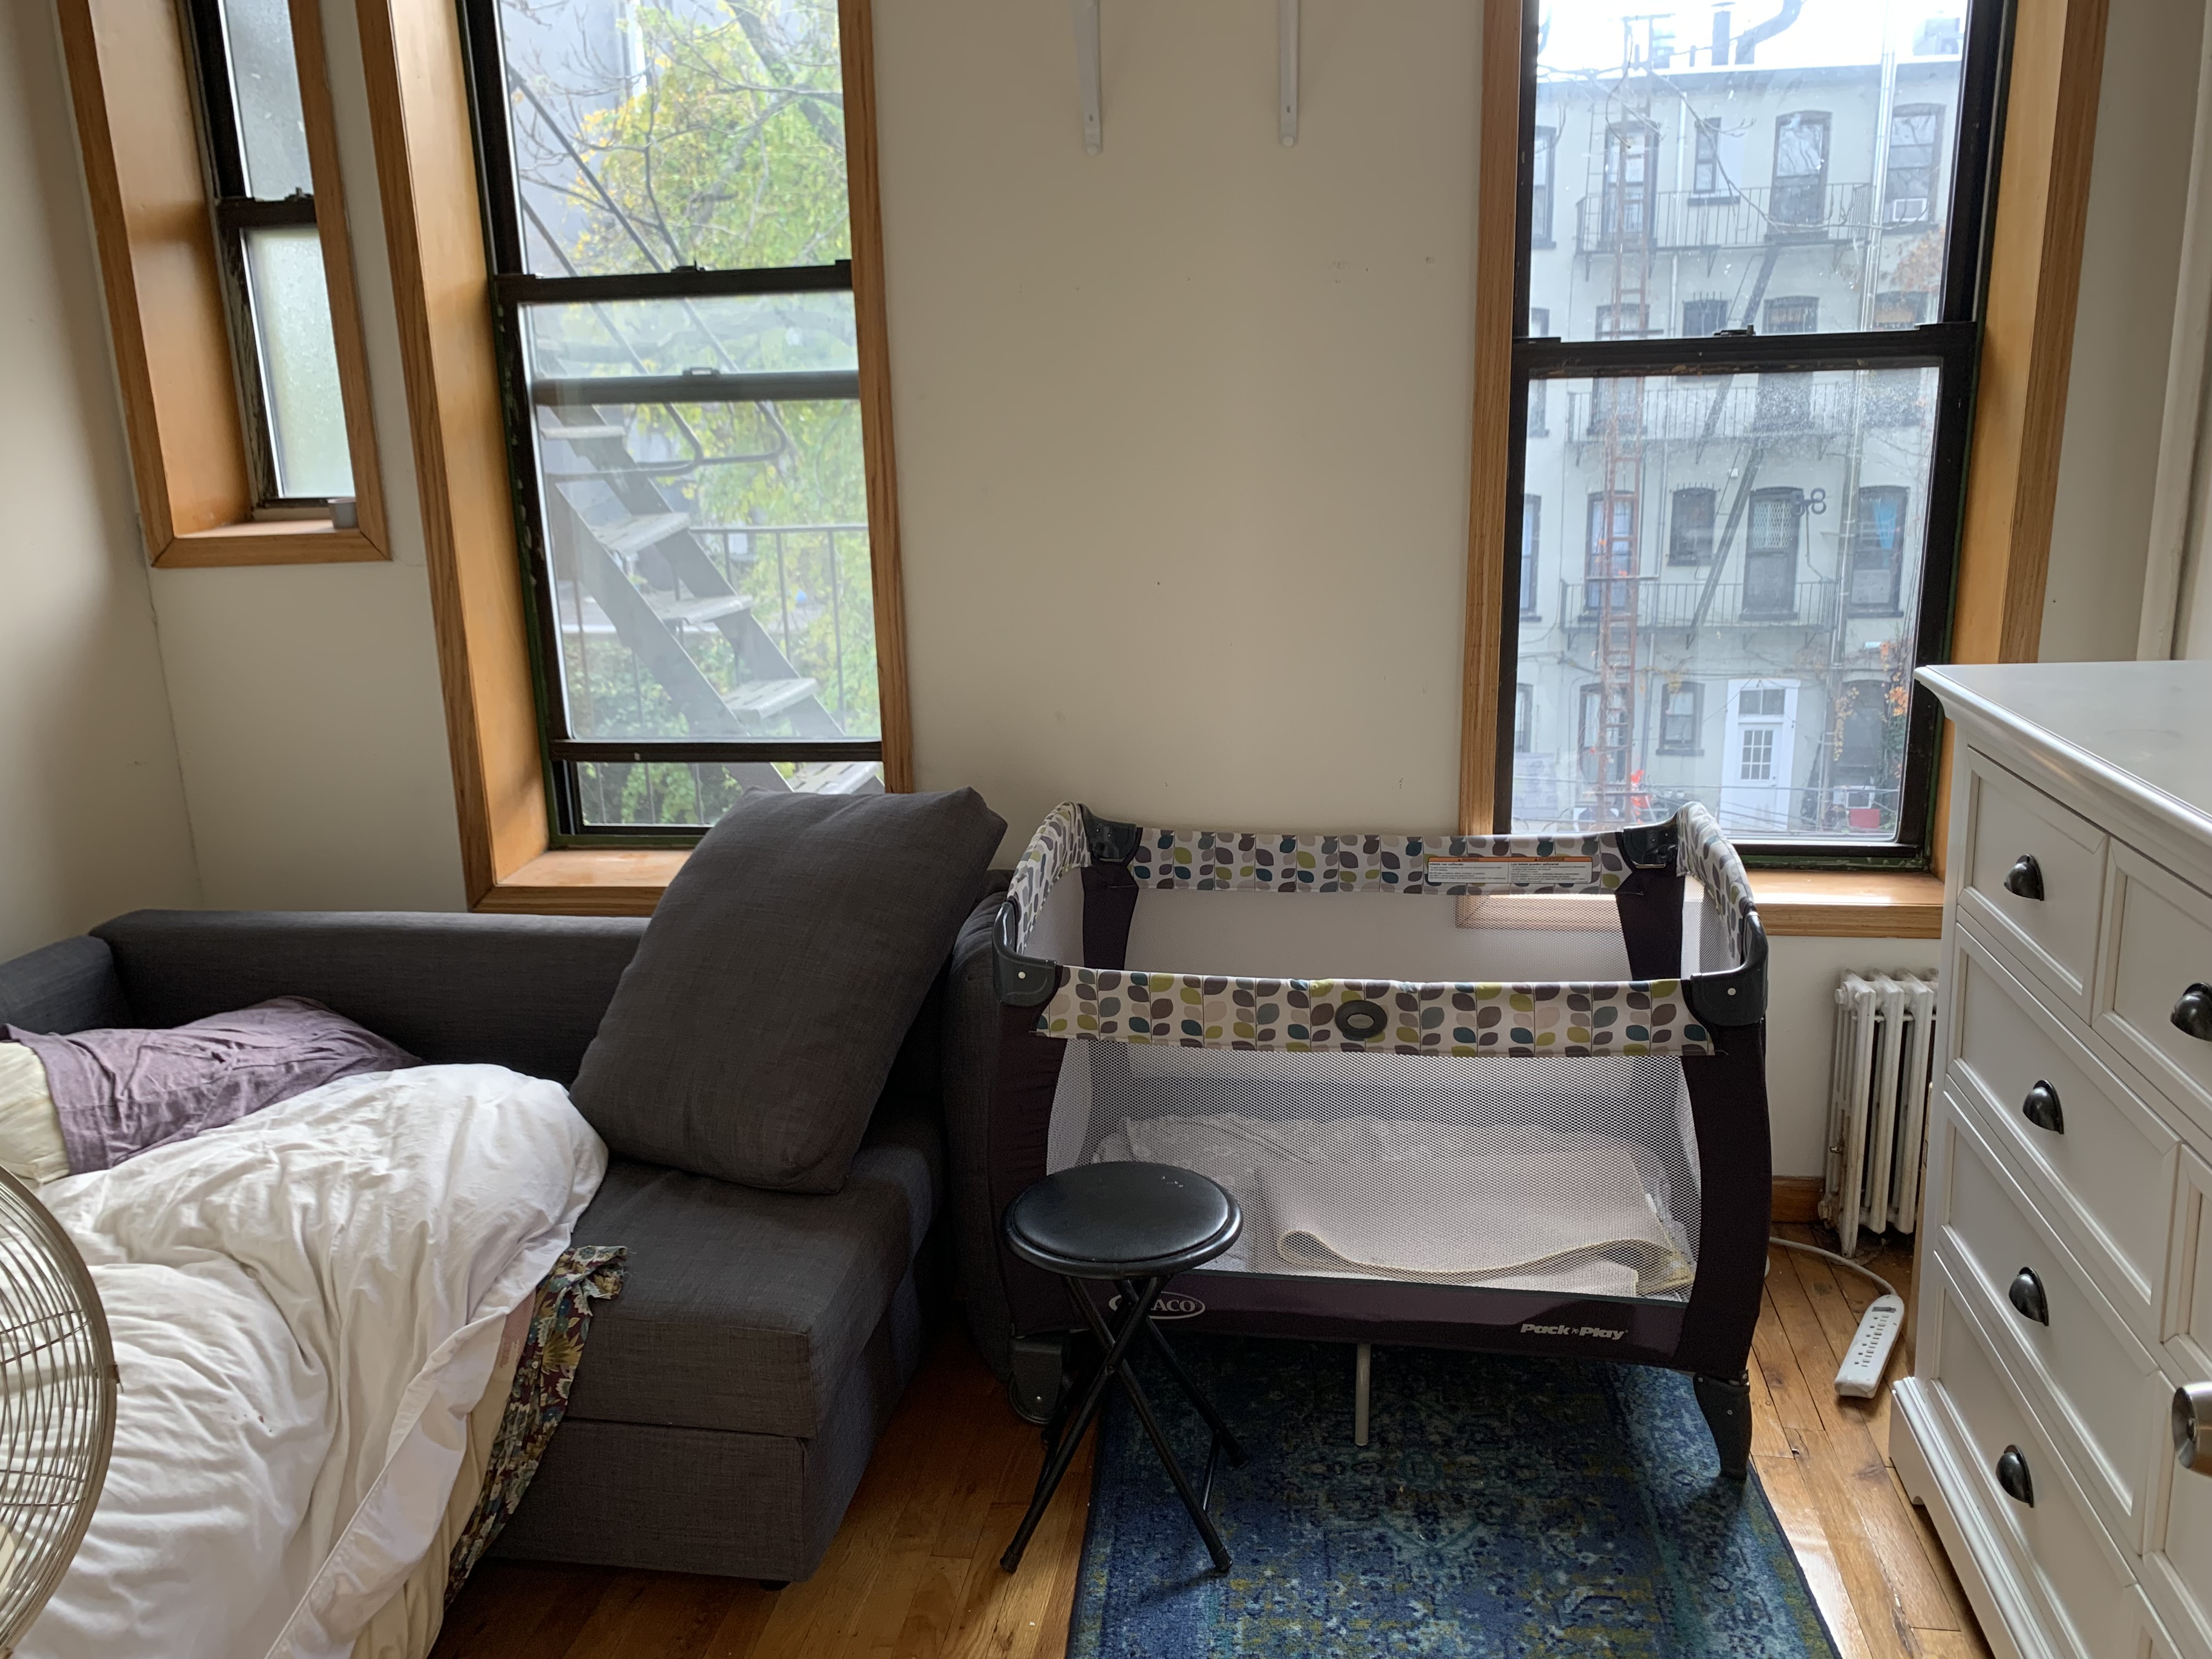 700 sackett St, Brooklyn, NY, 2 Bedrooms Bedrooms, 4 Rooms Rooms,1 BathroomBathrooms,Apartment,For Rent,sackett St,3,1246